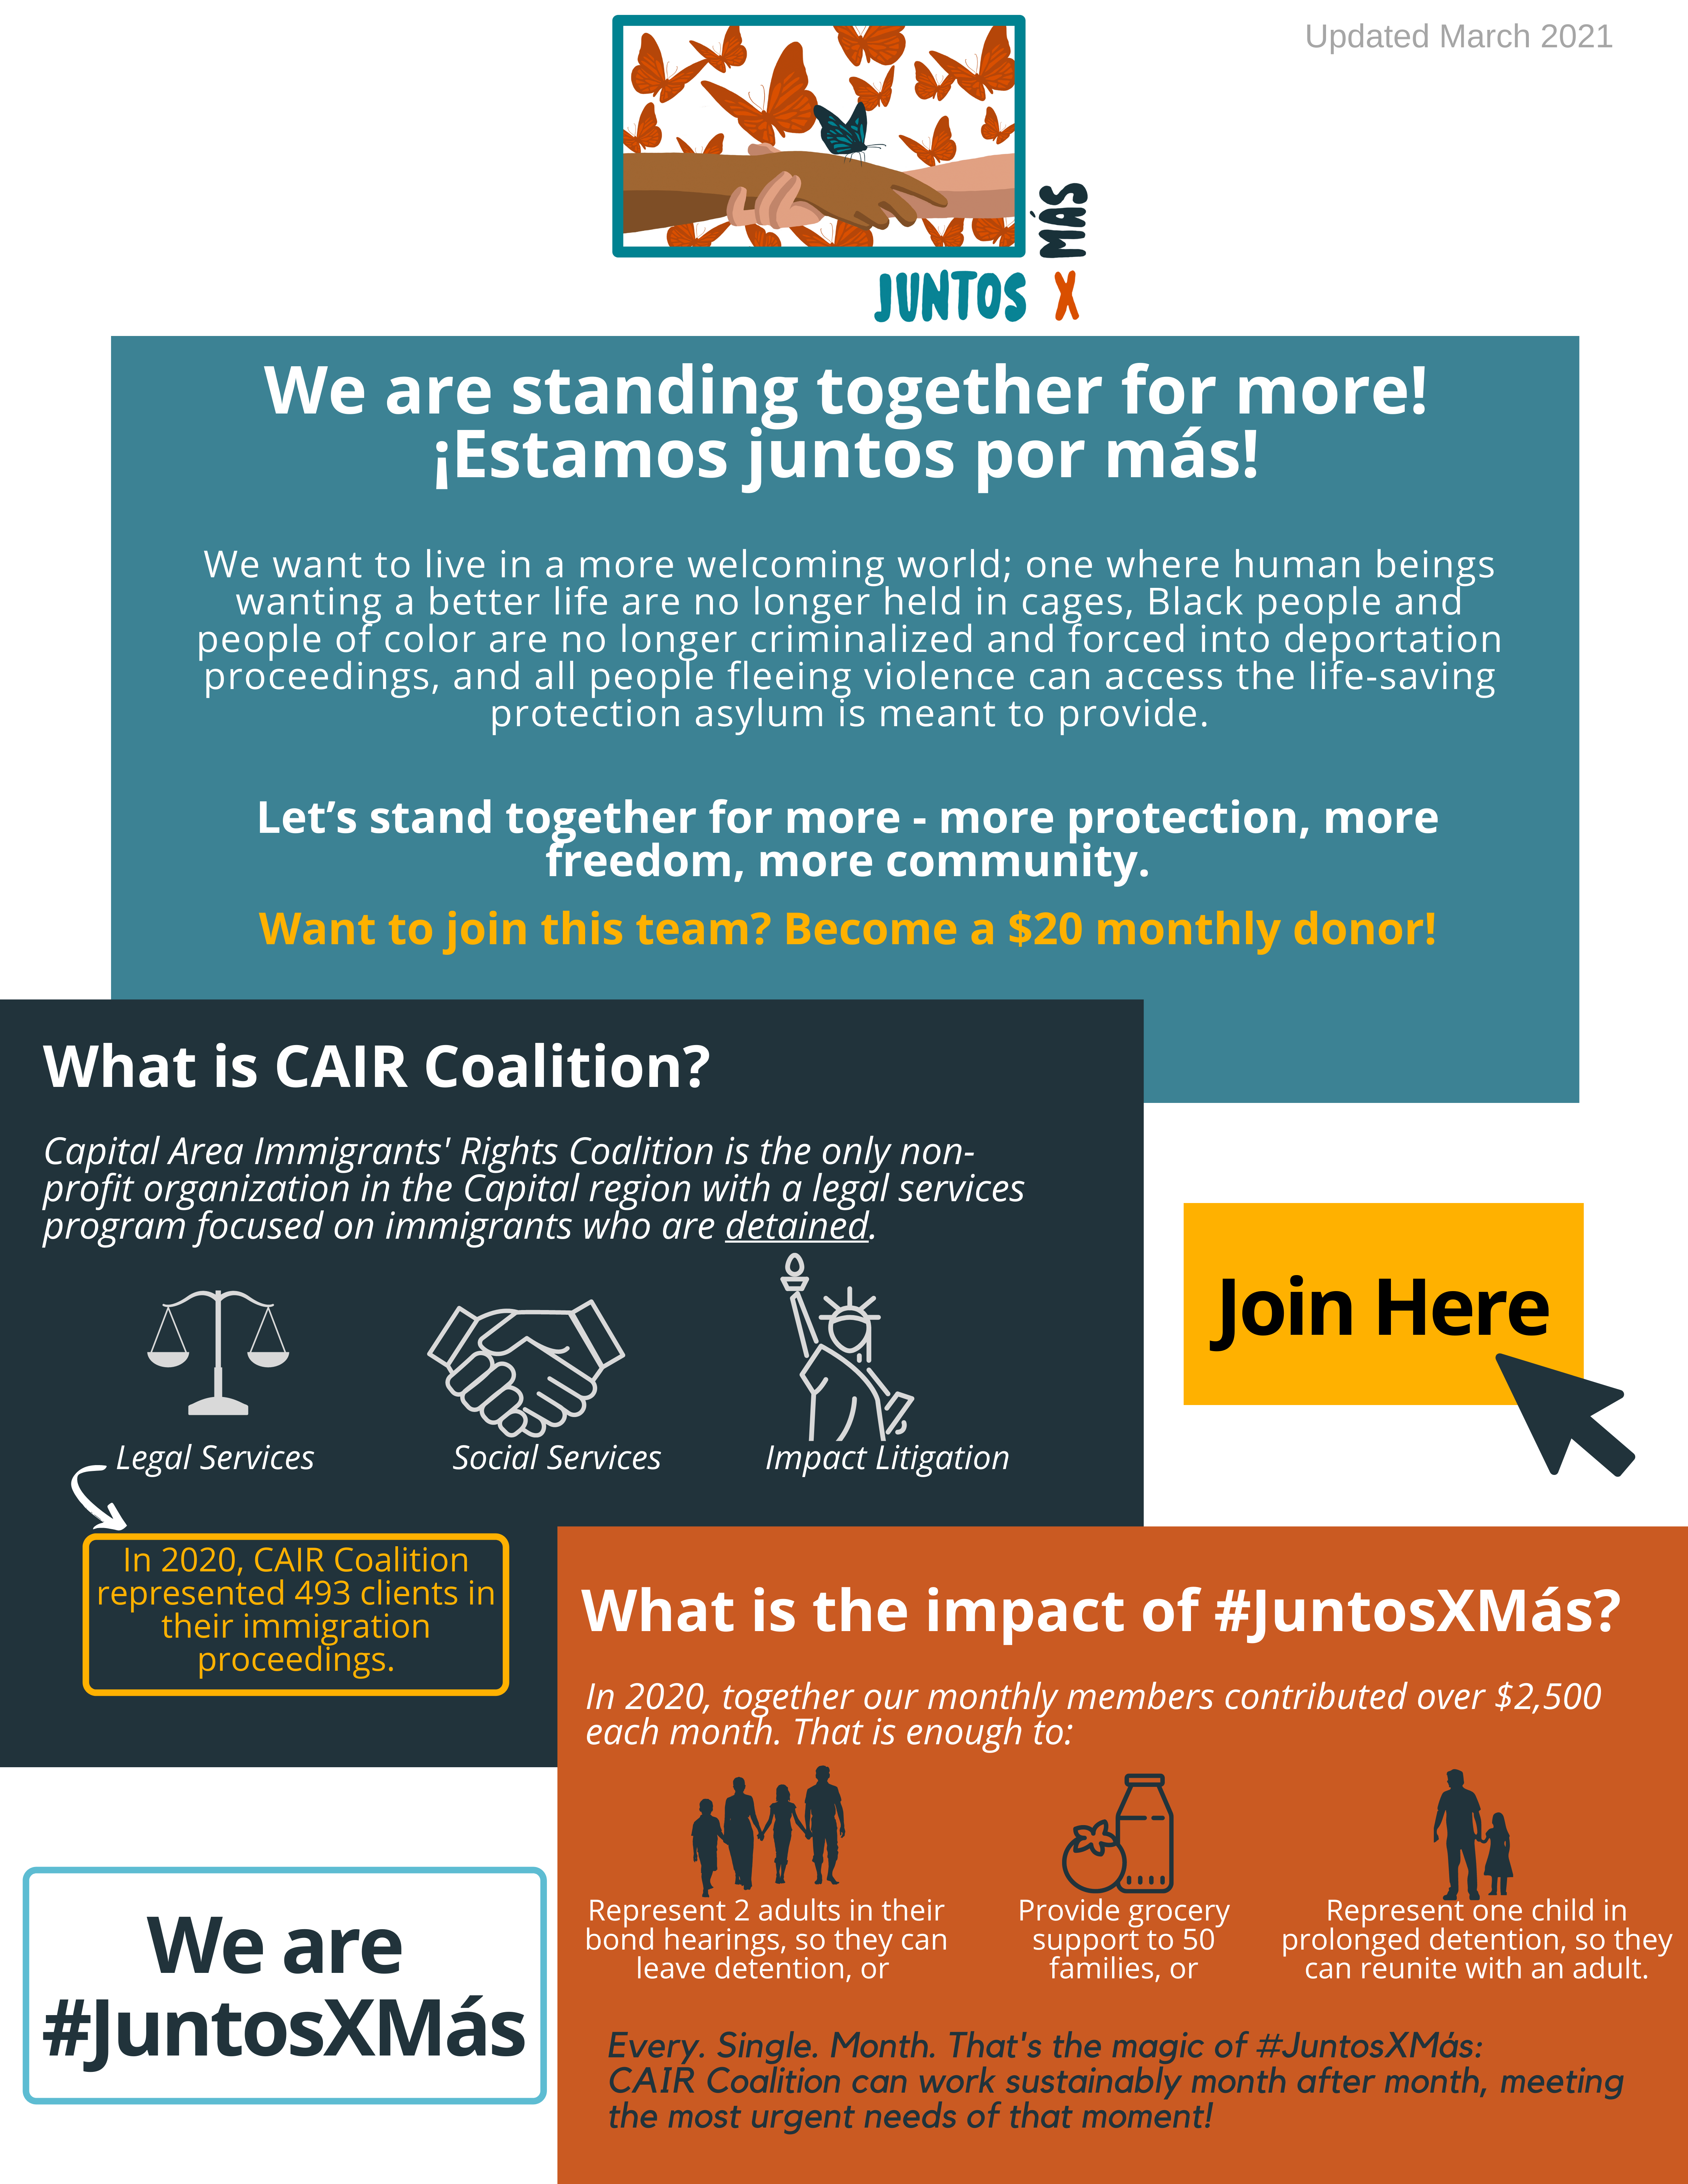 Juntos X Mas - CAIR Coalition's Monthly Donor Community. Click Here to Join